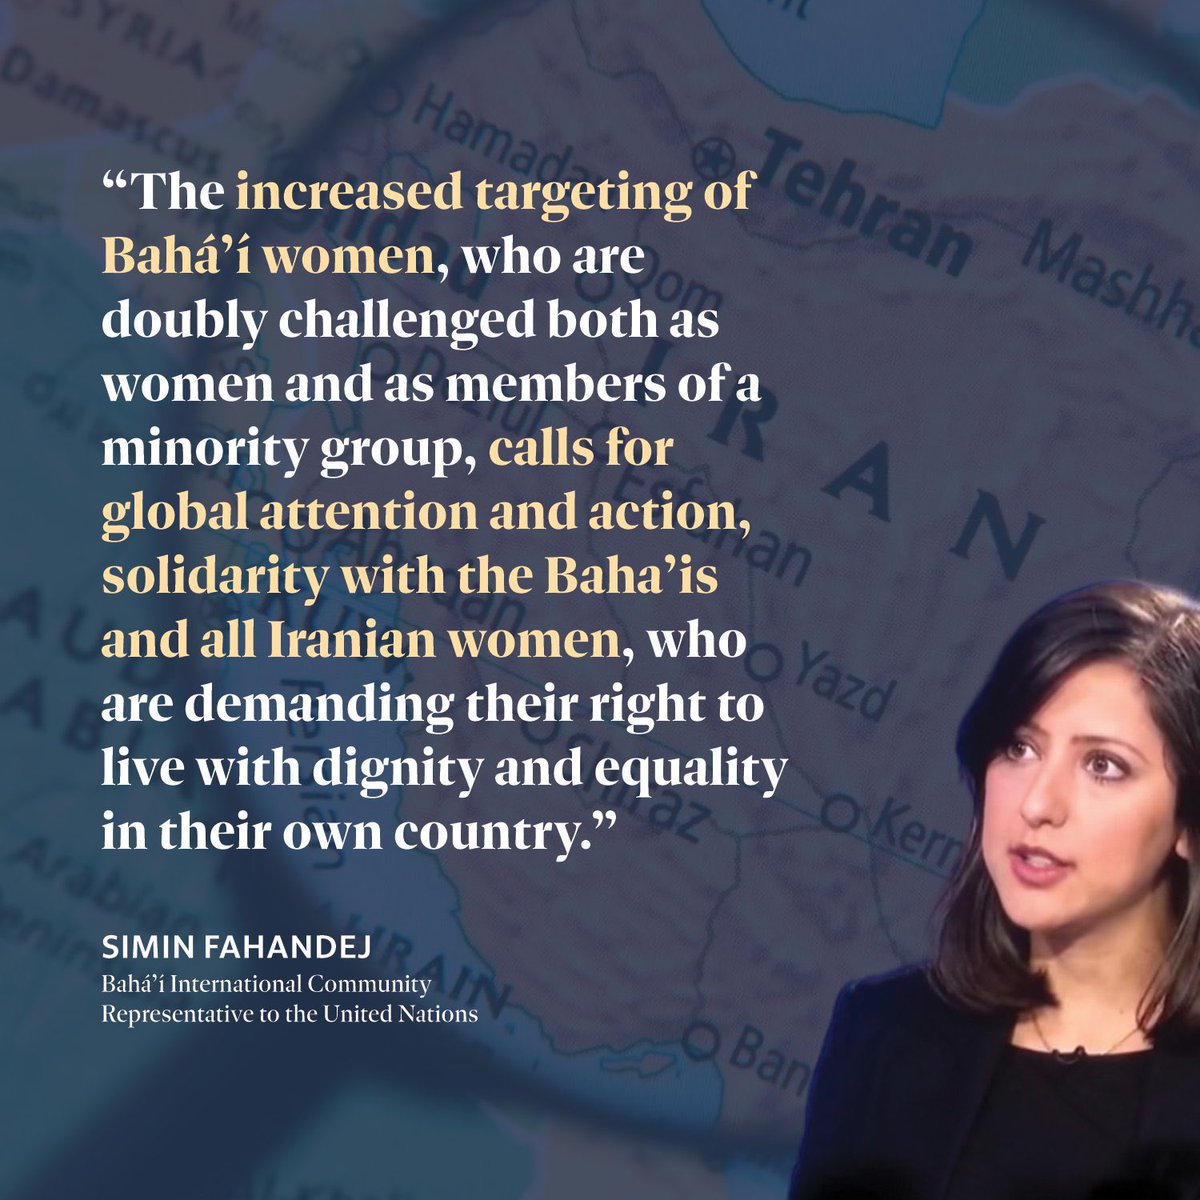 Baha’i’s face severe persecution under the Islamic Republic, being denied education, having their homes confiscated or destroyed, and imprisoned arbitrarily, just to name a few. This is all because they practice a religion that’s not Islam.